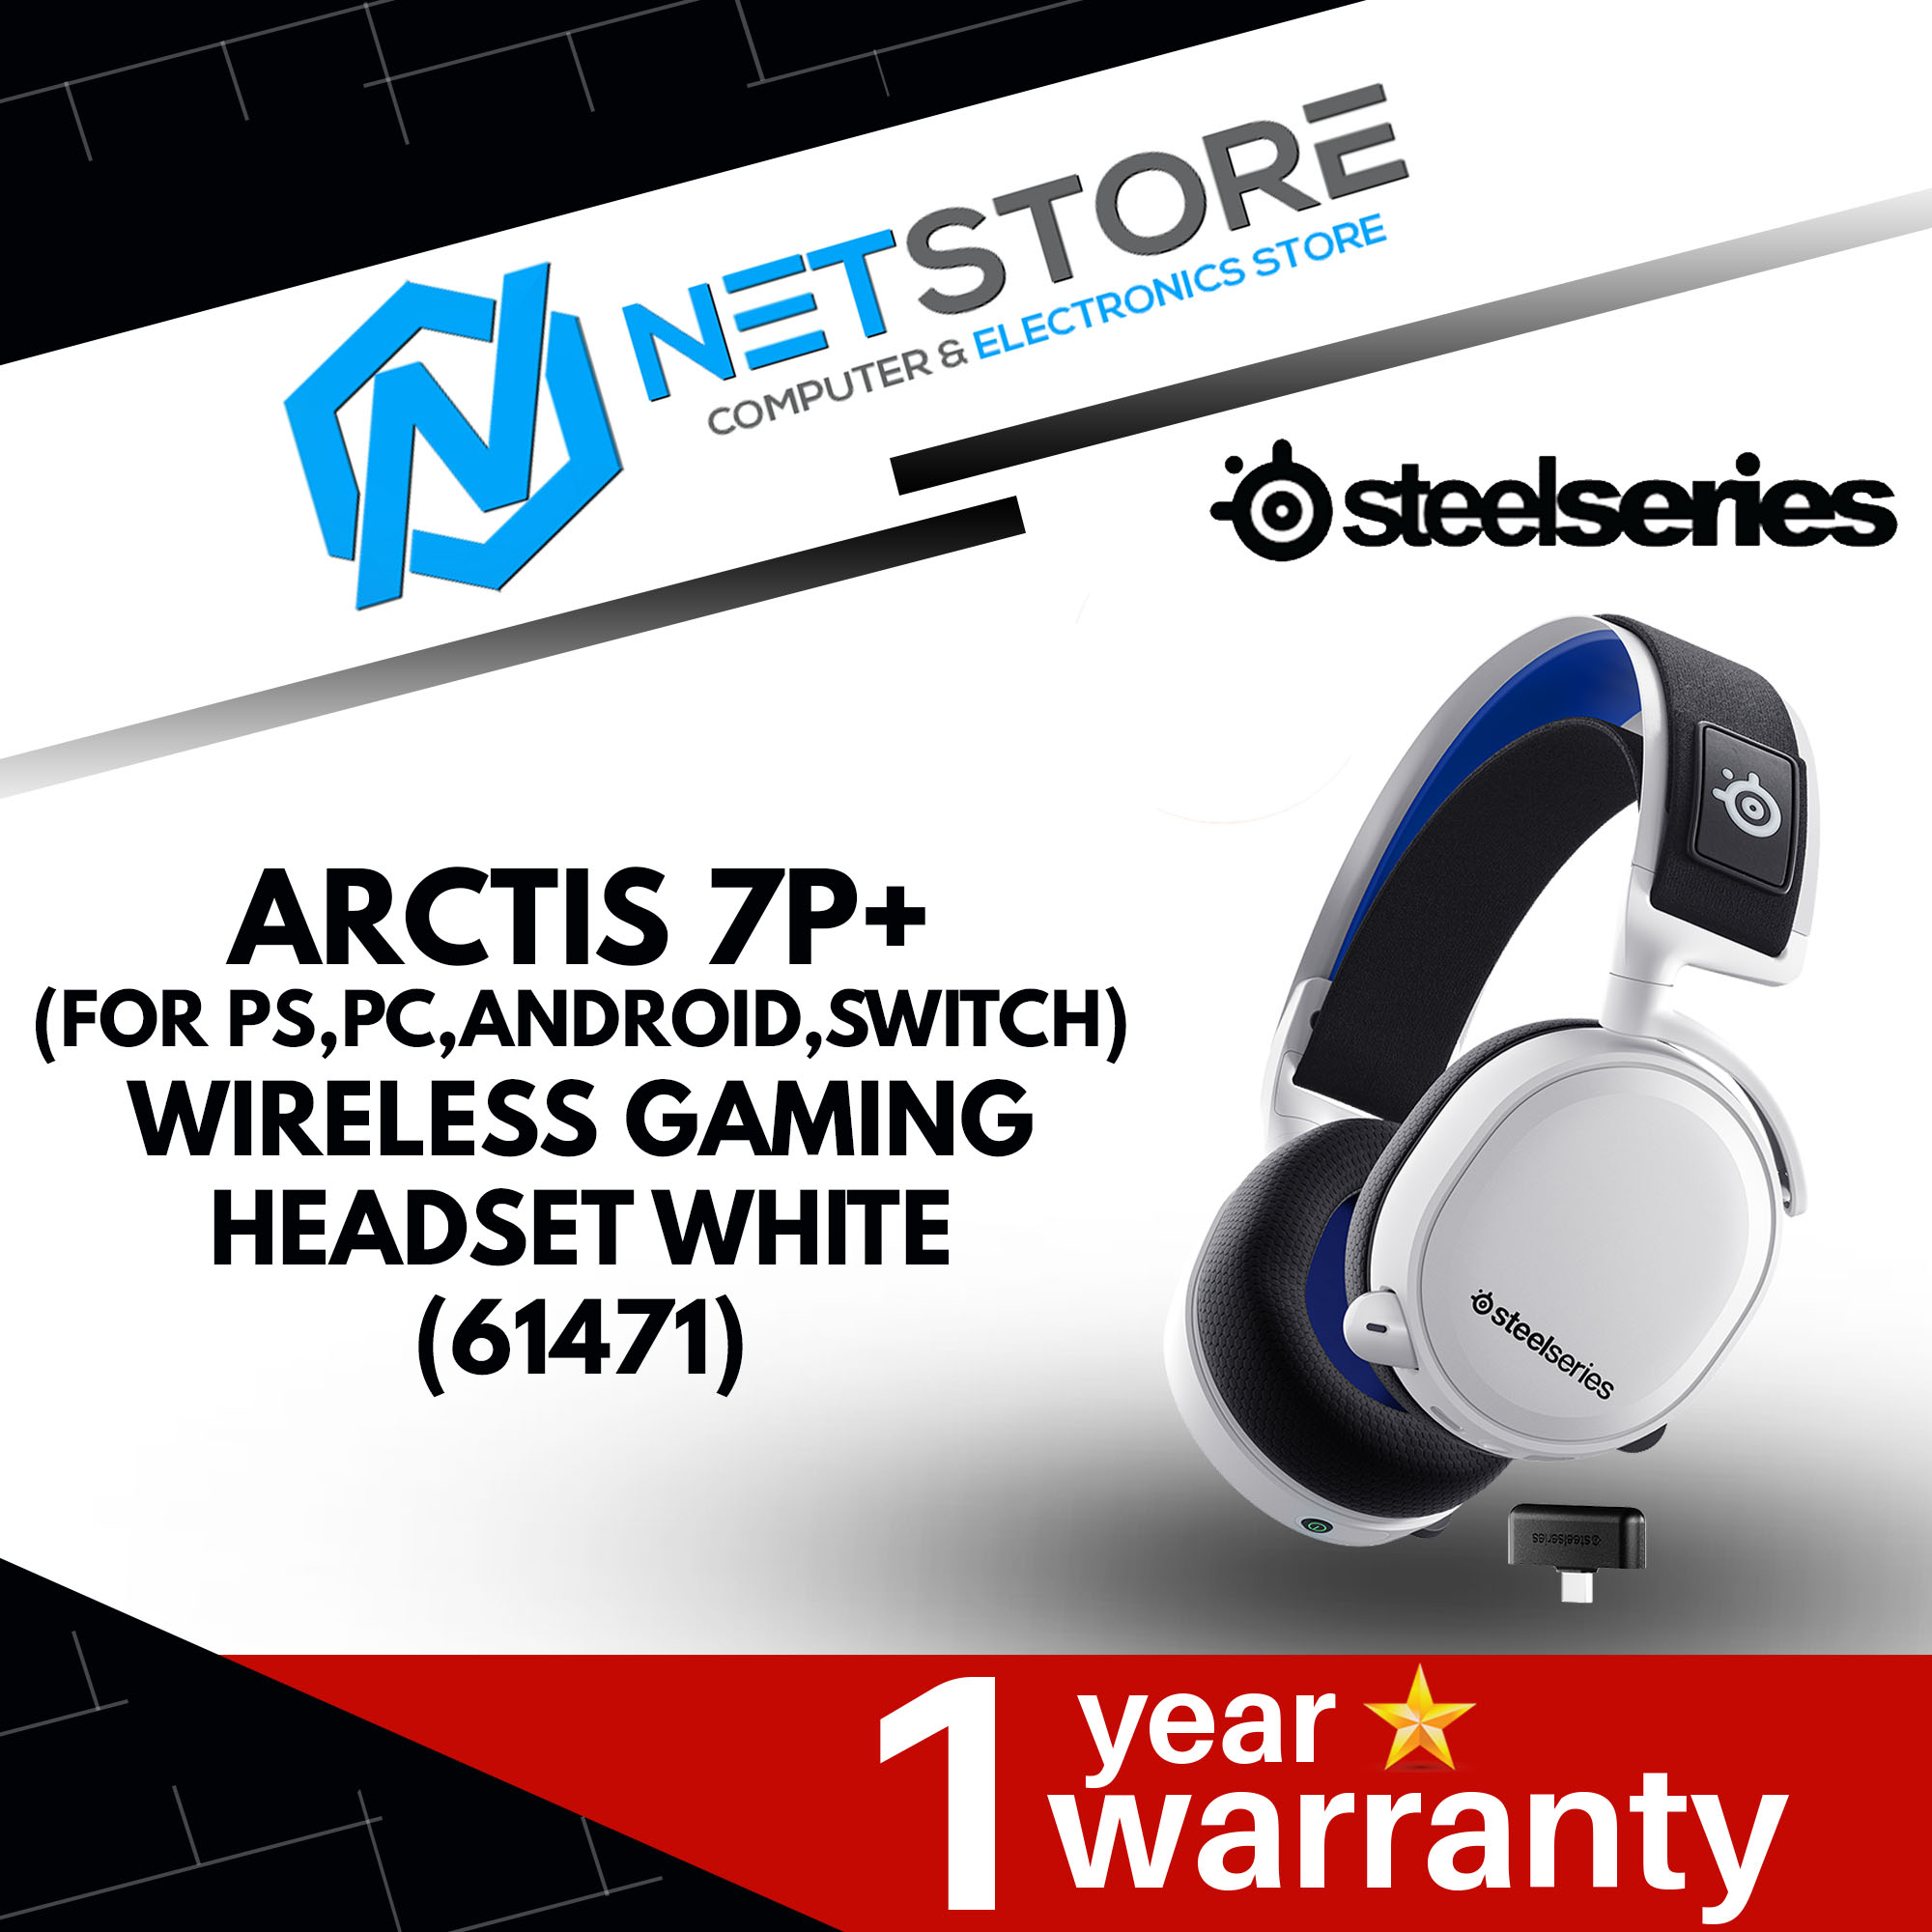 STEELSERIES ARCTIS 7P+ (PS,PC,ANDROID,SWITCH) WIRELESS GAMING HEADSET